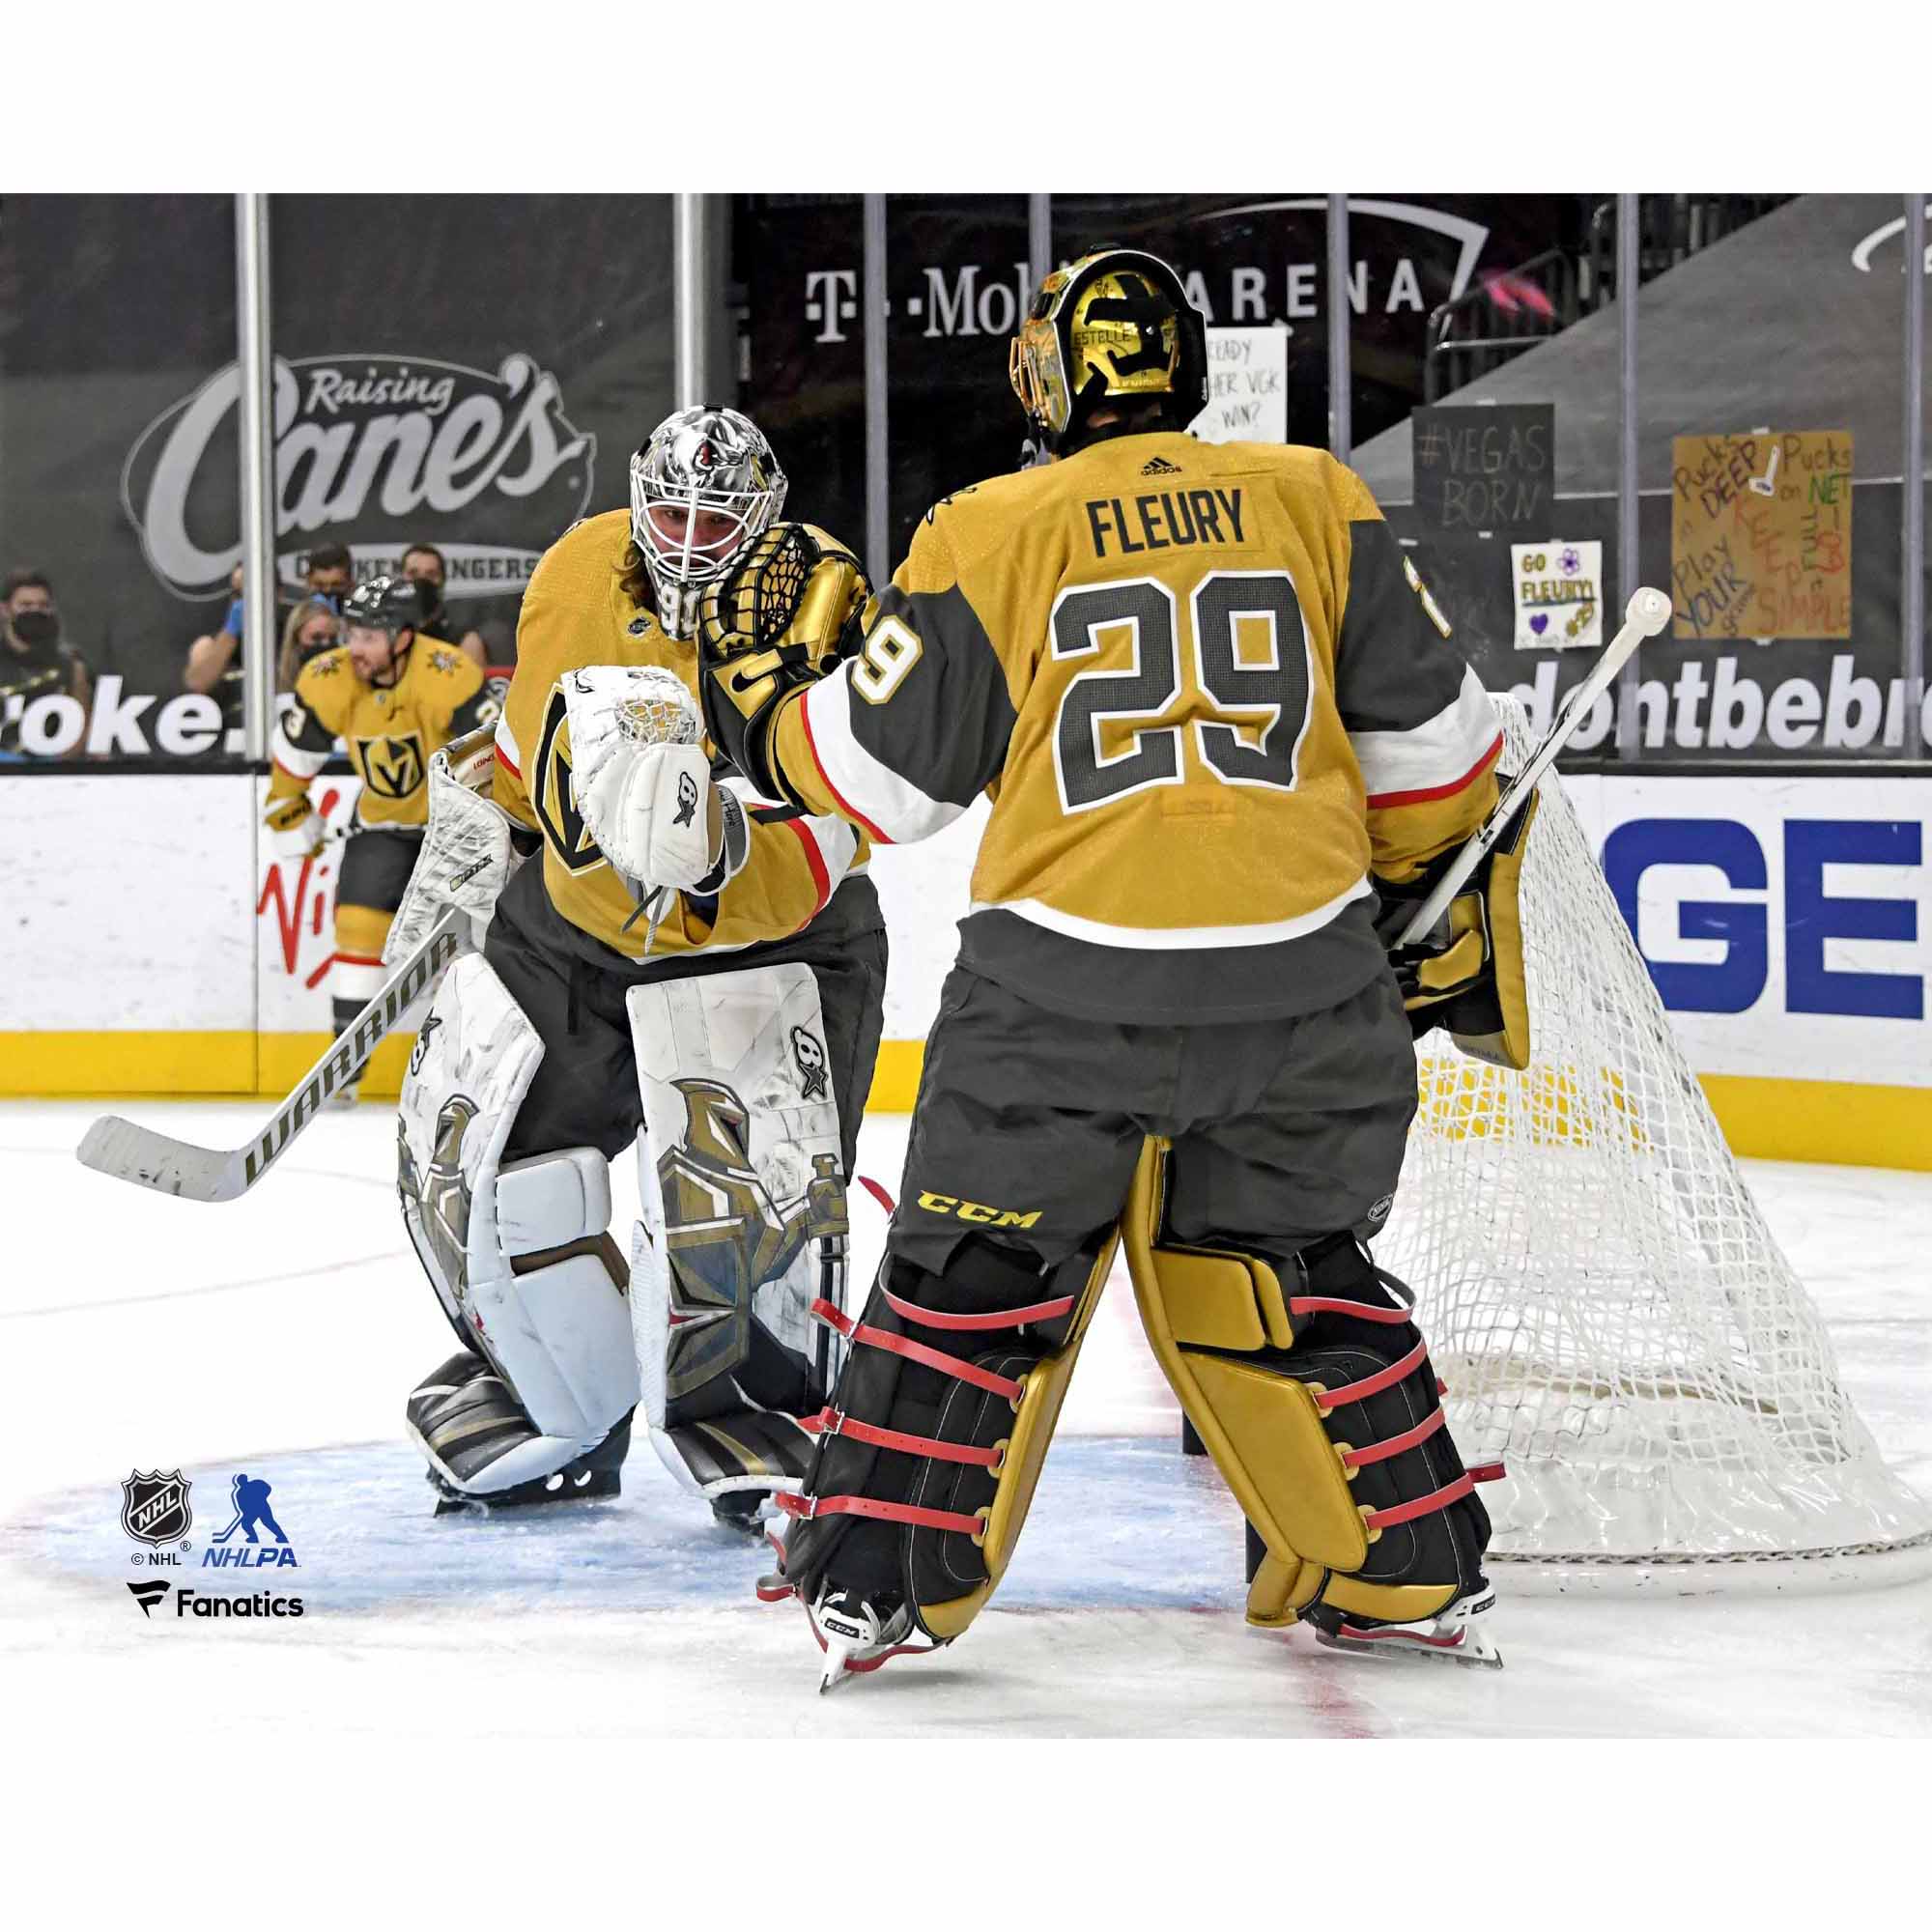 Marc-Andre Fleury and Robin Lehner Vegas Golden Knights Unsigned Gold Alternate Jersey Touching Gloves vs. Arizona Coyotes Photograph